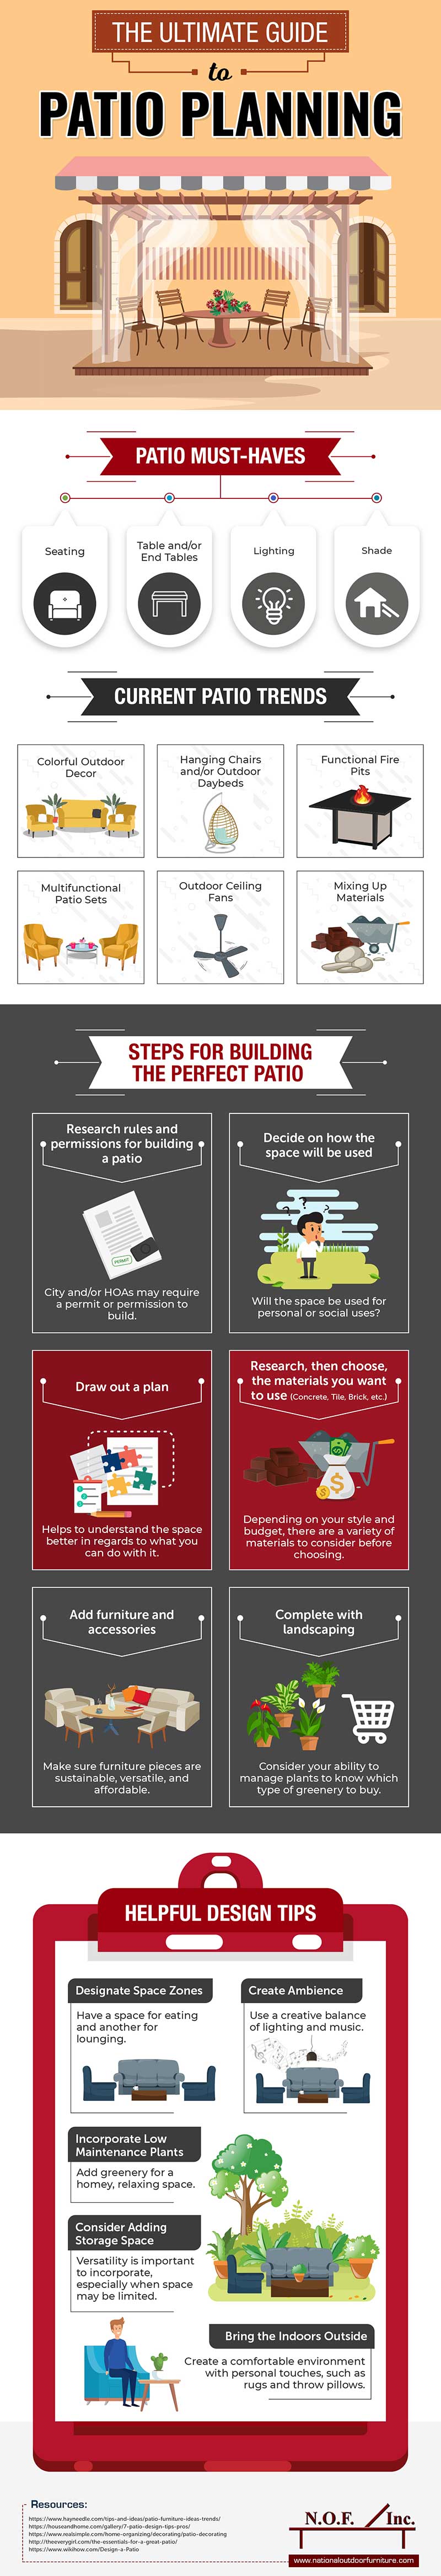 The Ultimate Guide to Patio Planning